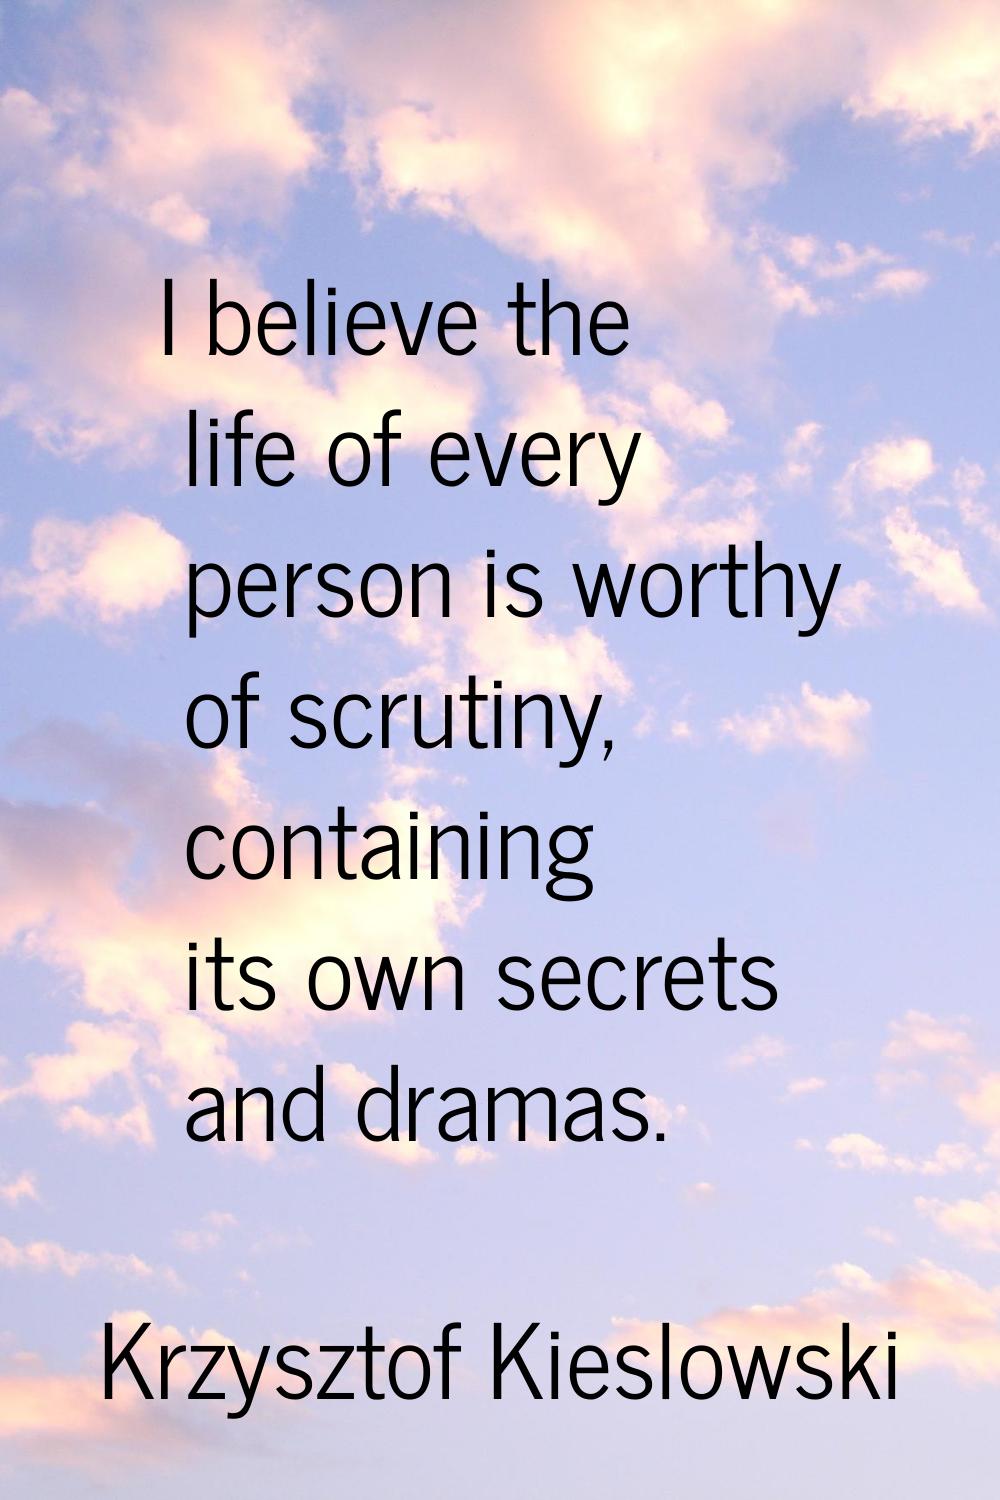 I believe the life of every person is worthy of scrutiny, containing its own secrets and dramas.